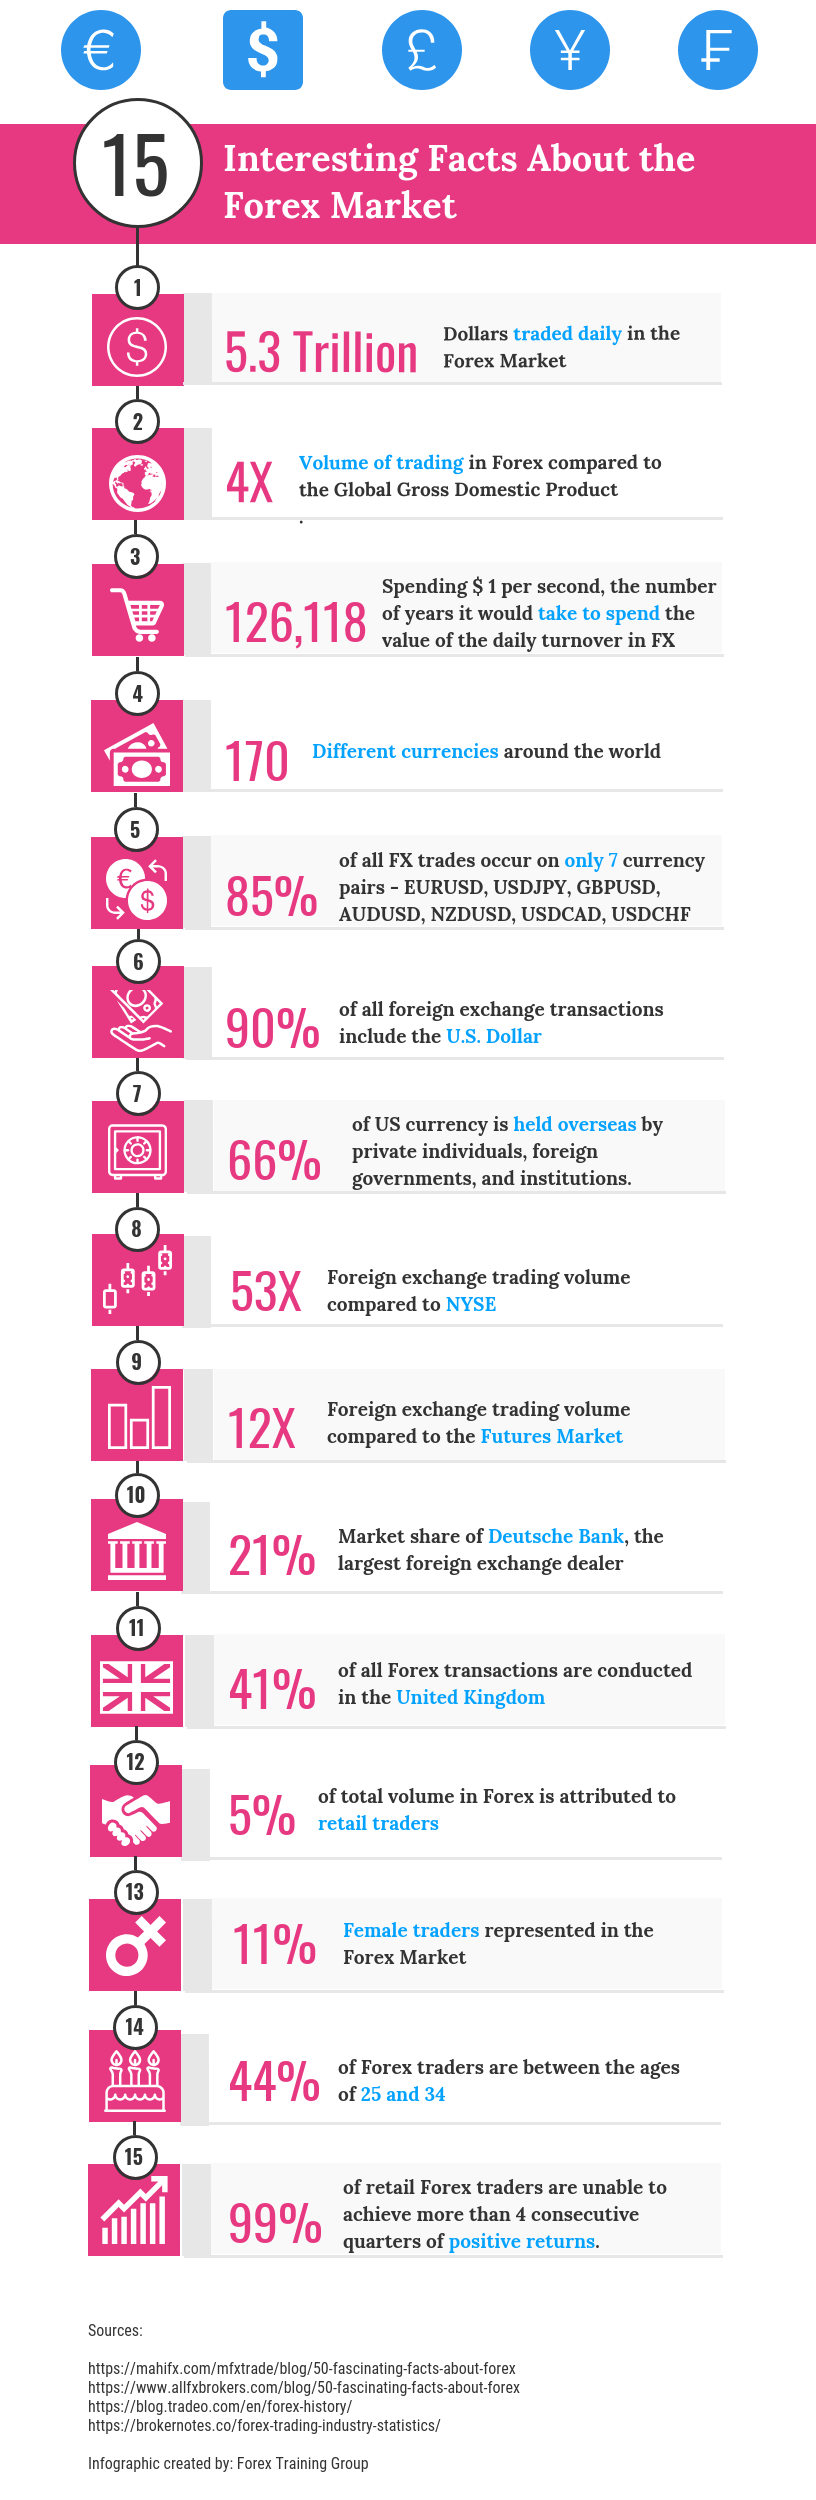 15-Interesting-Facts-About-the-Forex-Market-Infographic